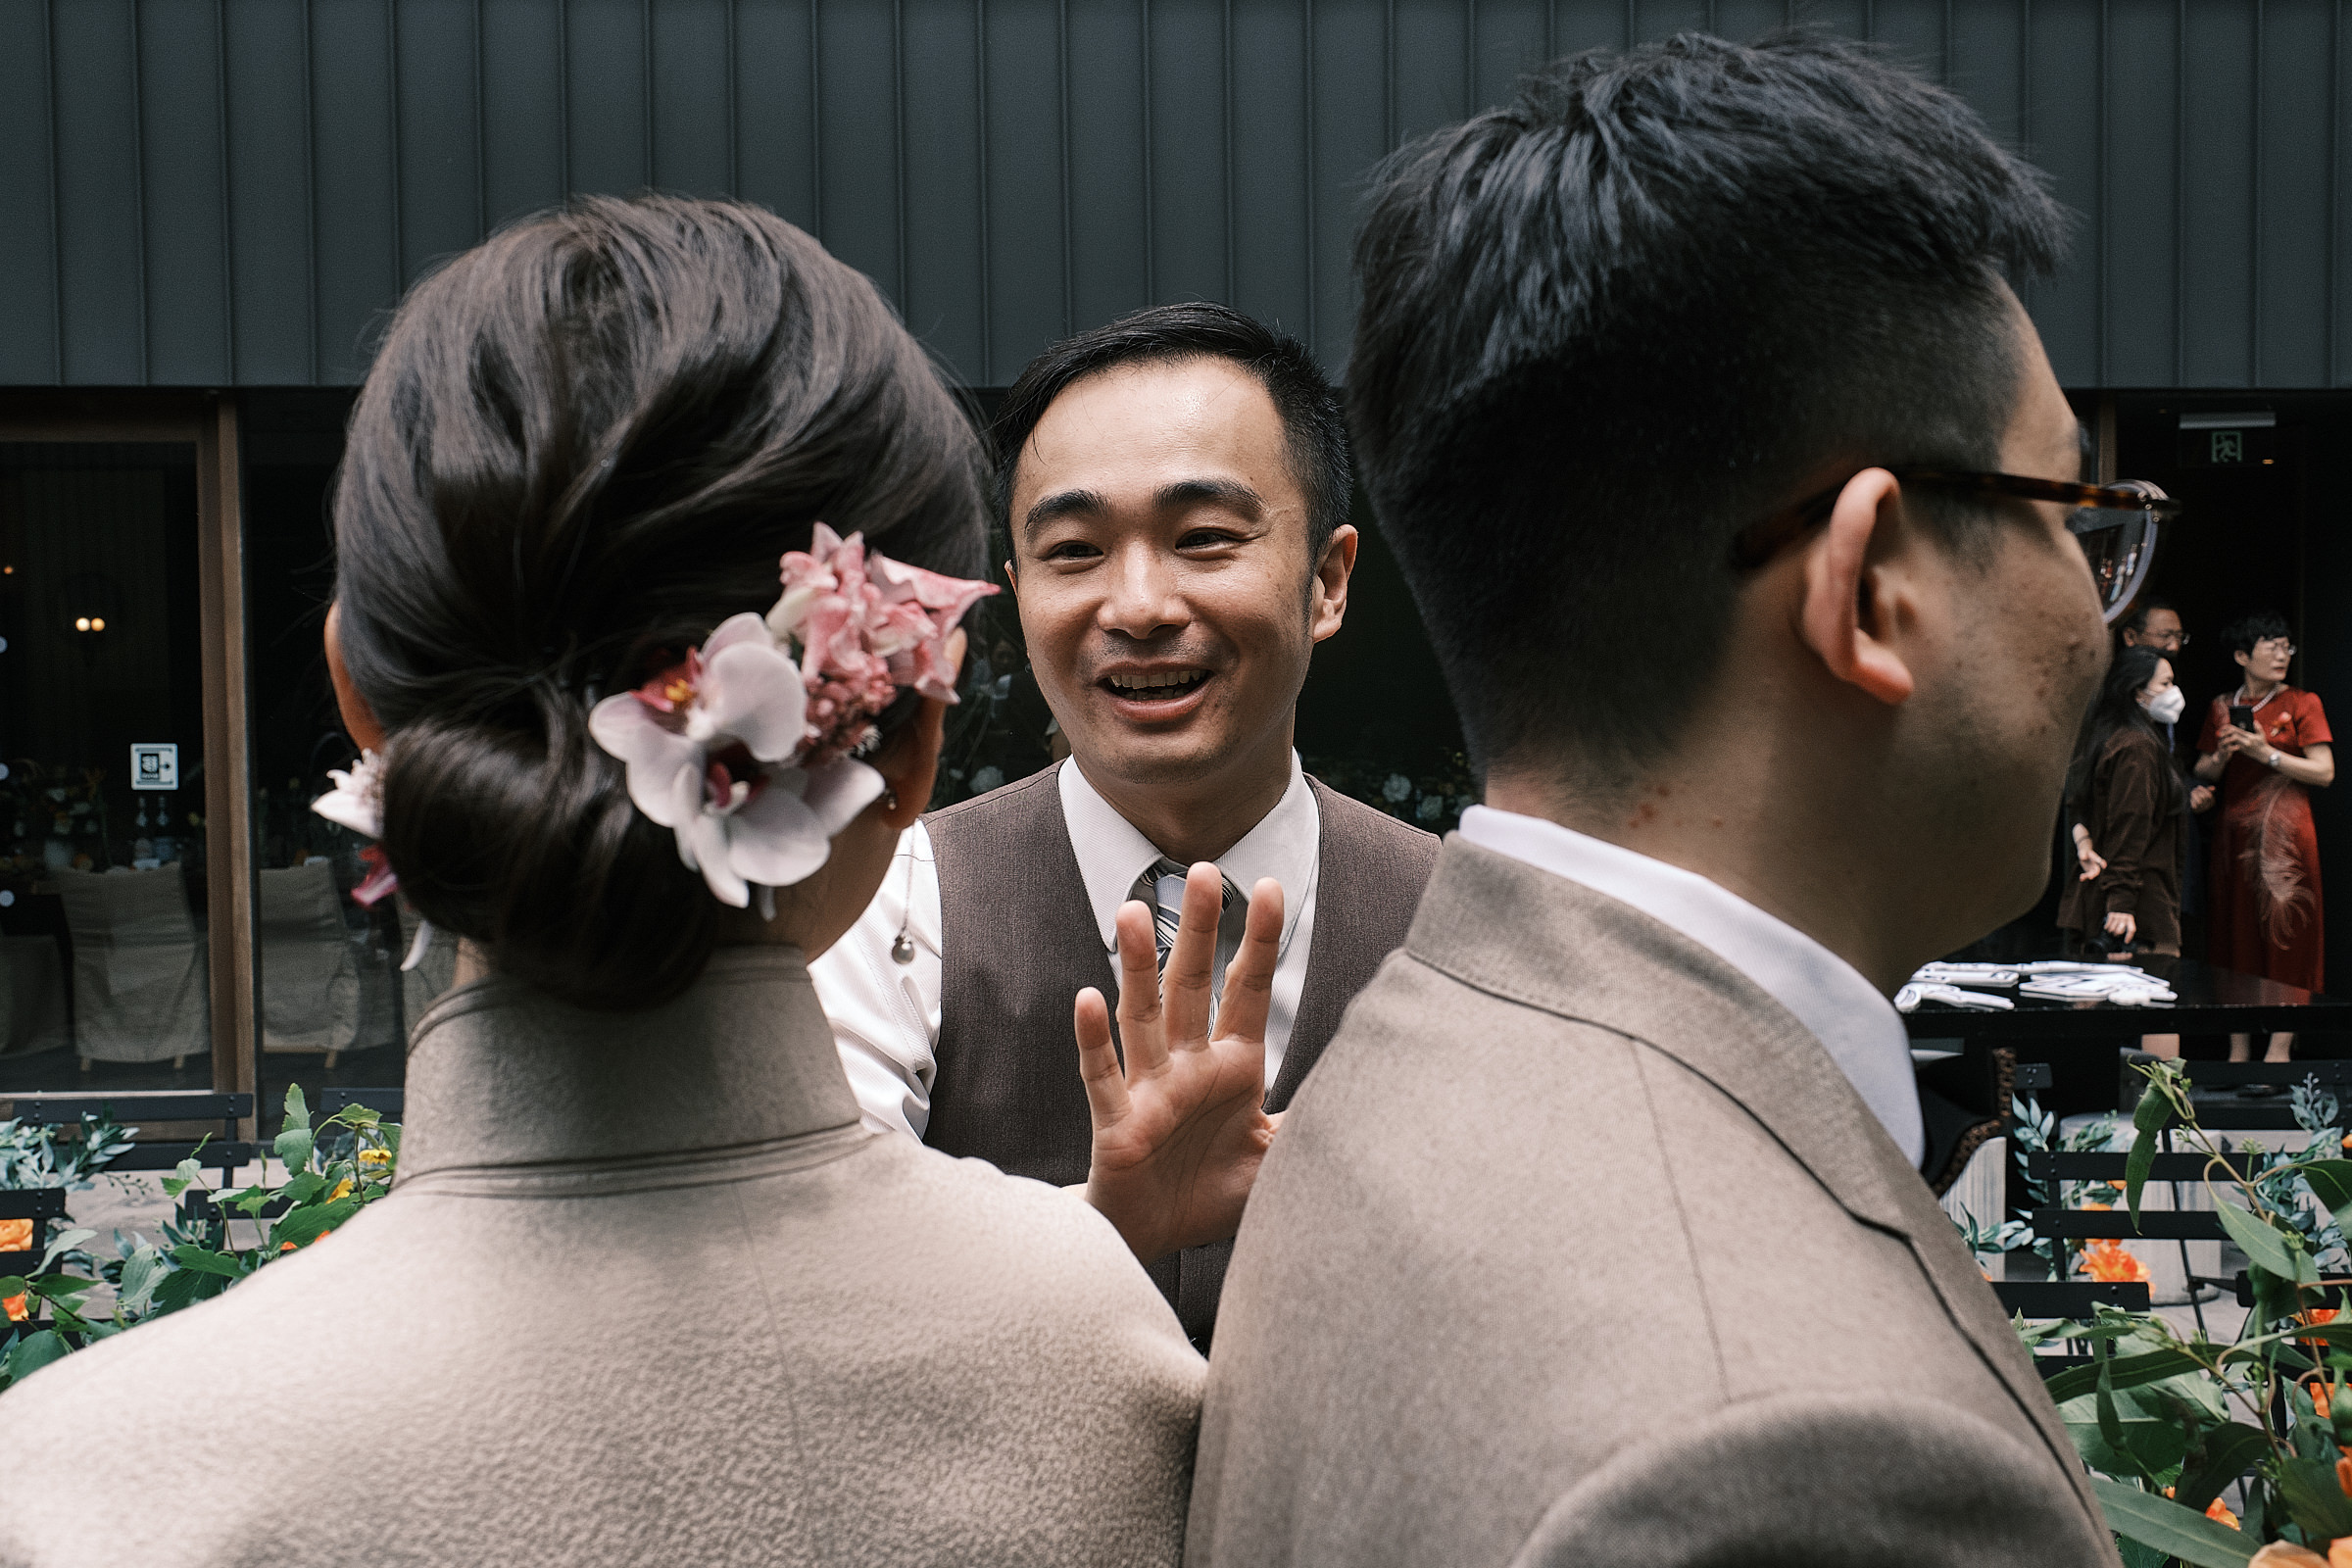 wedding host tries to explain ceremony process to bride and groom in shanghai